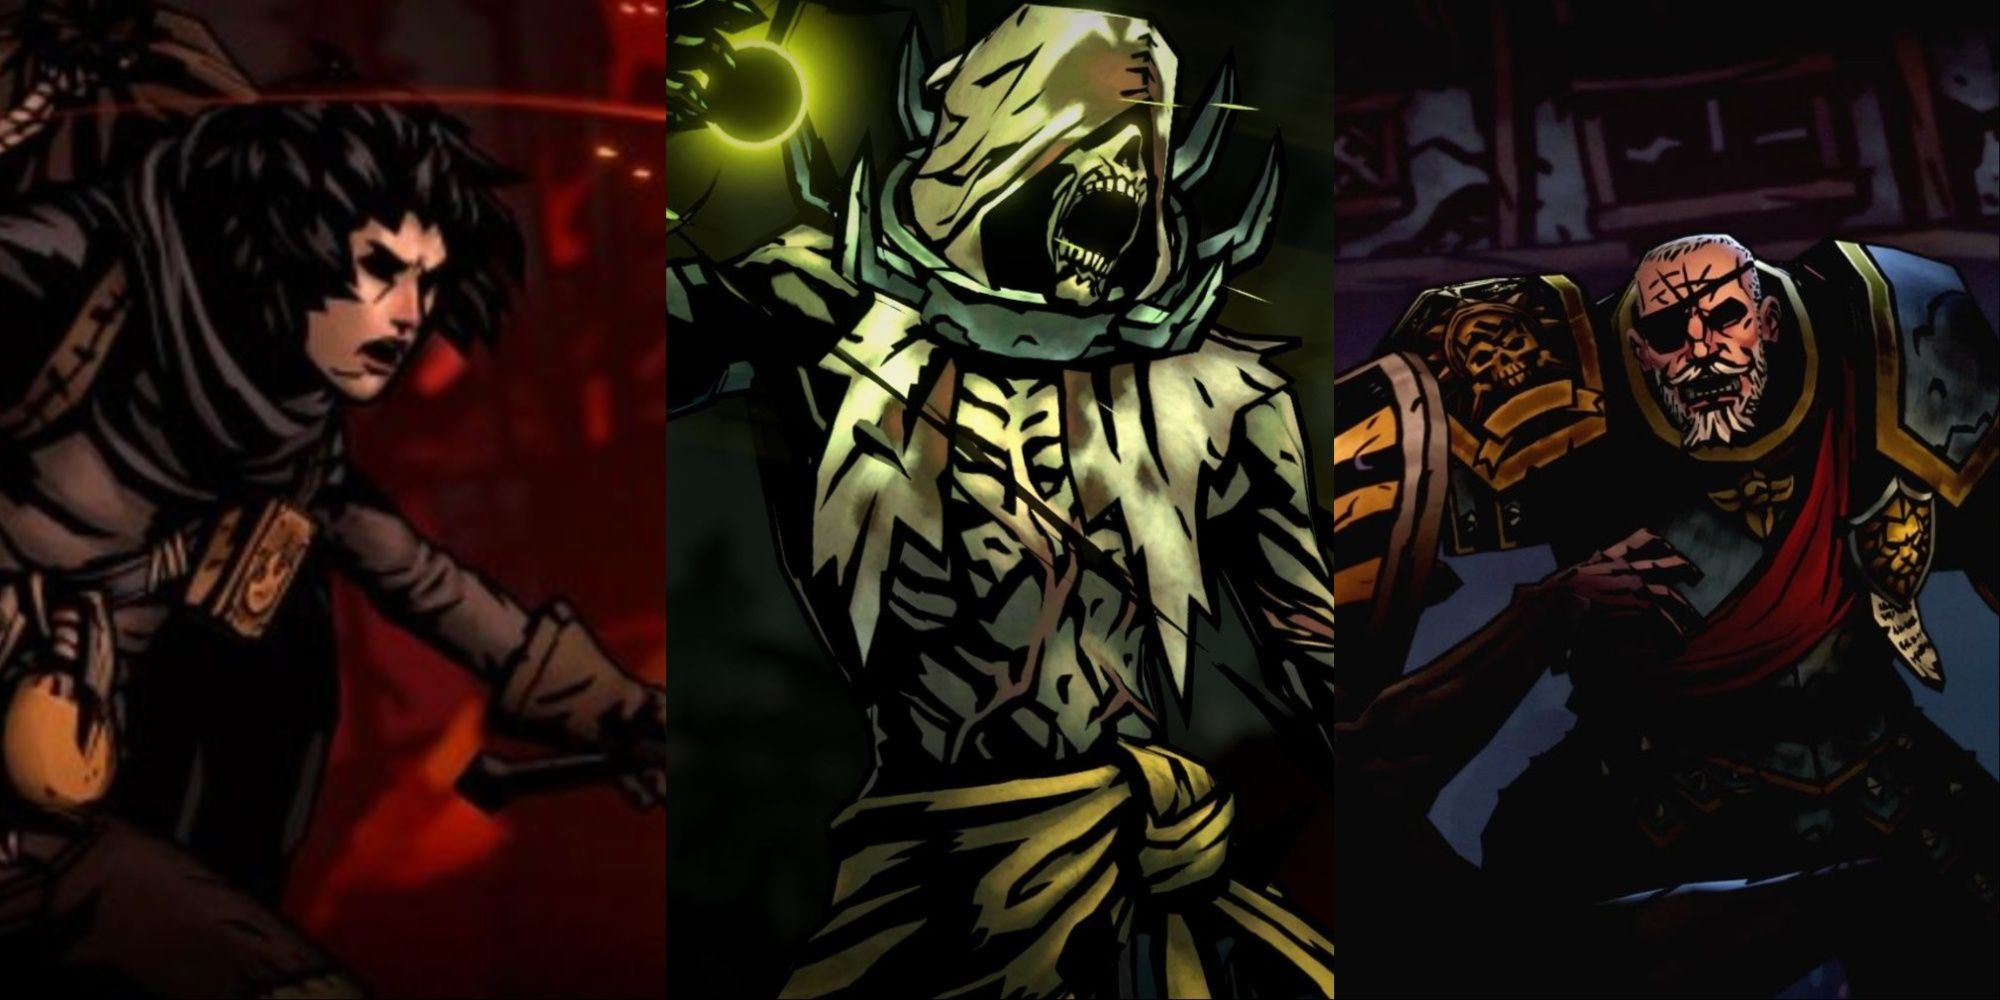 Art of the Runaway, Flagellant, and Man at Arms from Darkest Dungeon 2